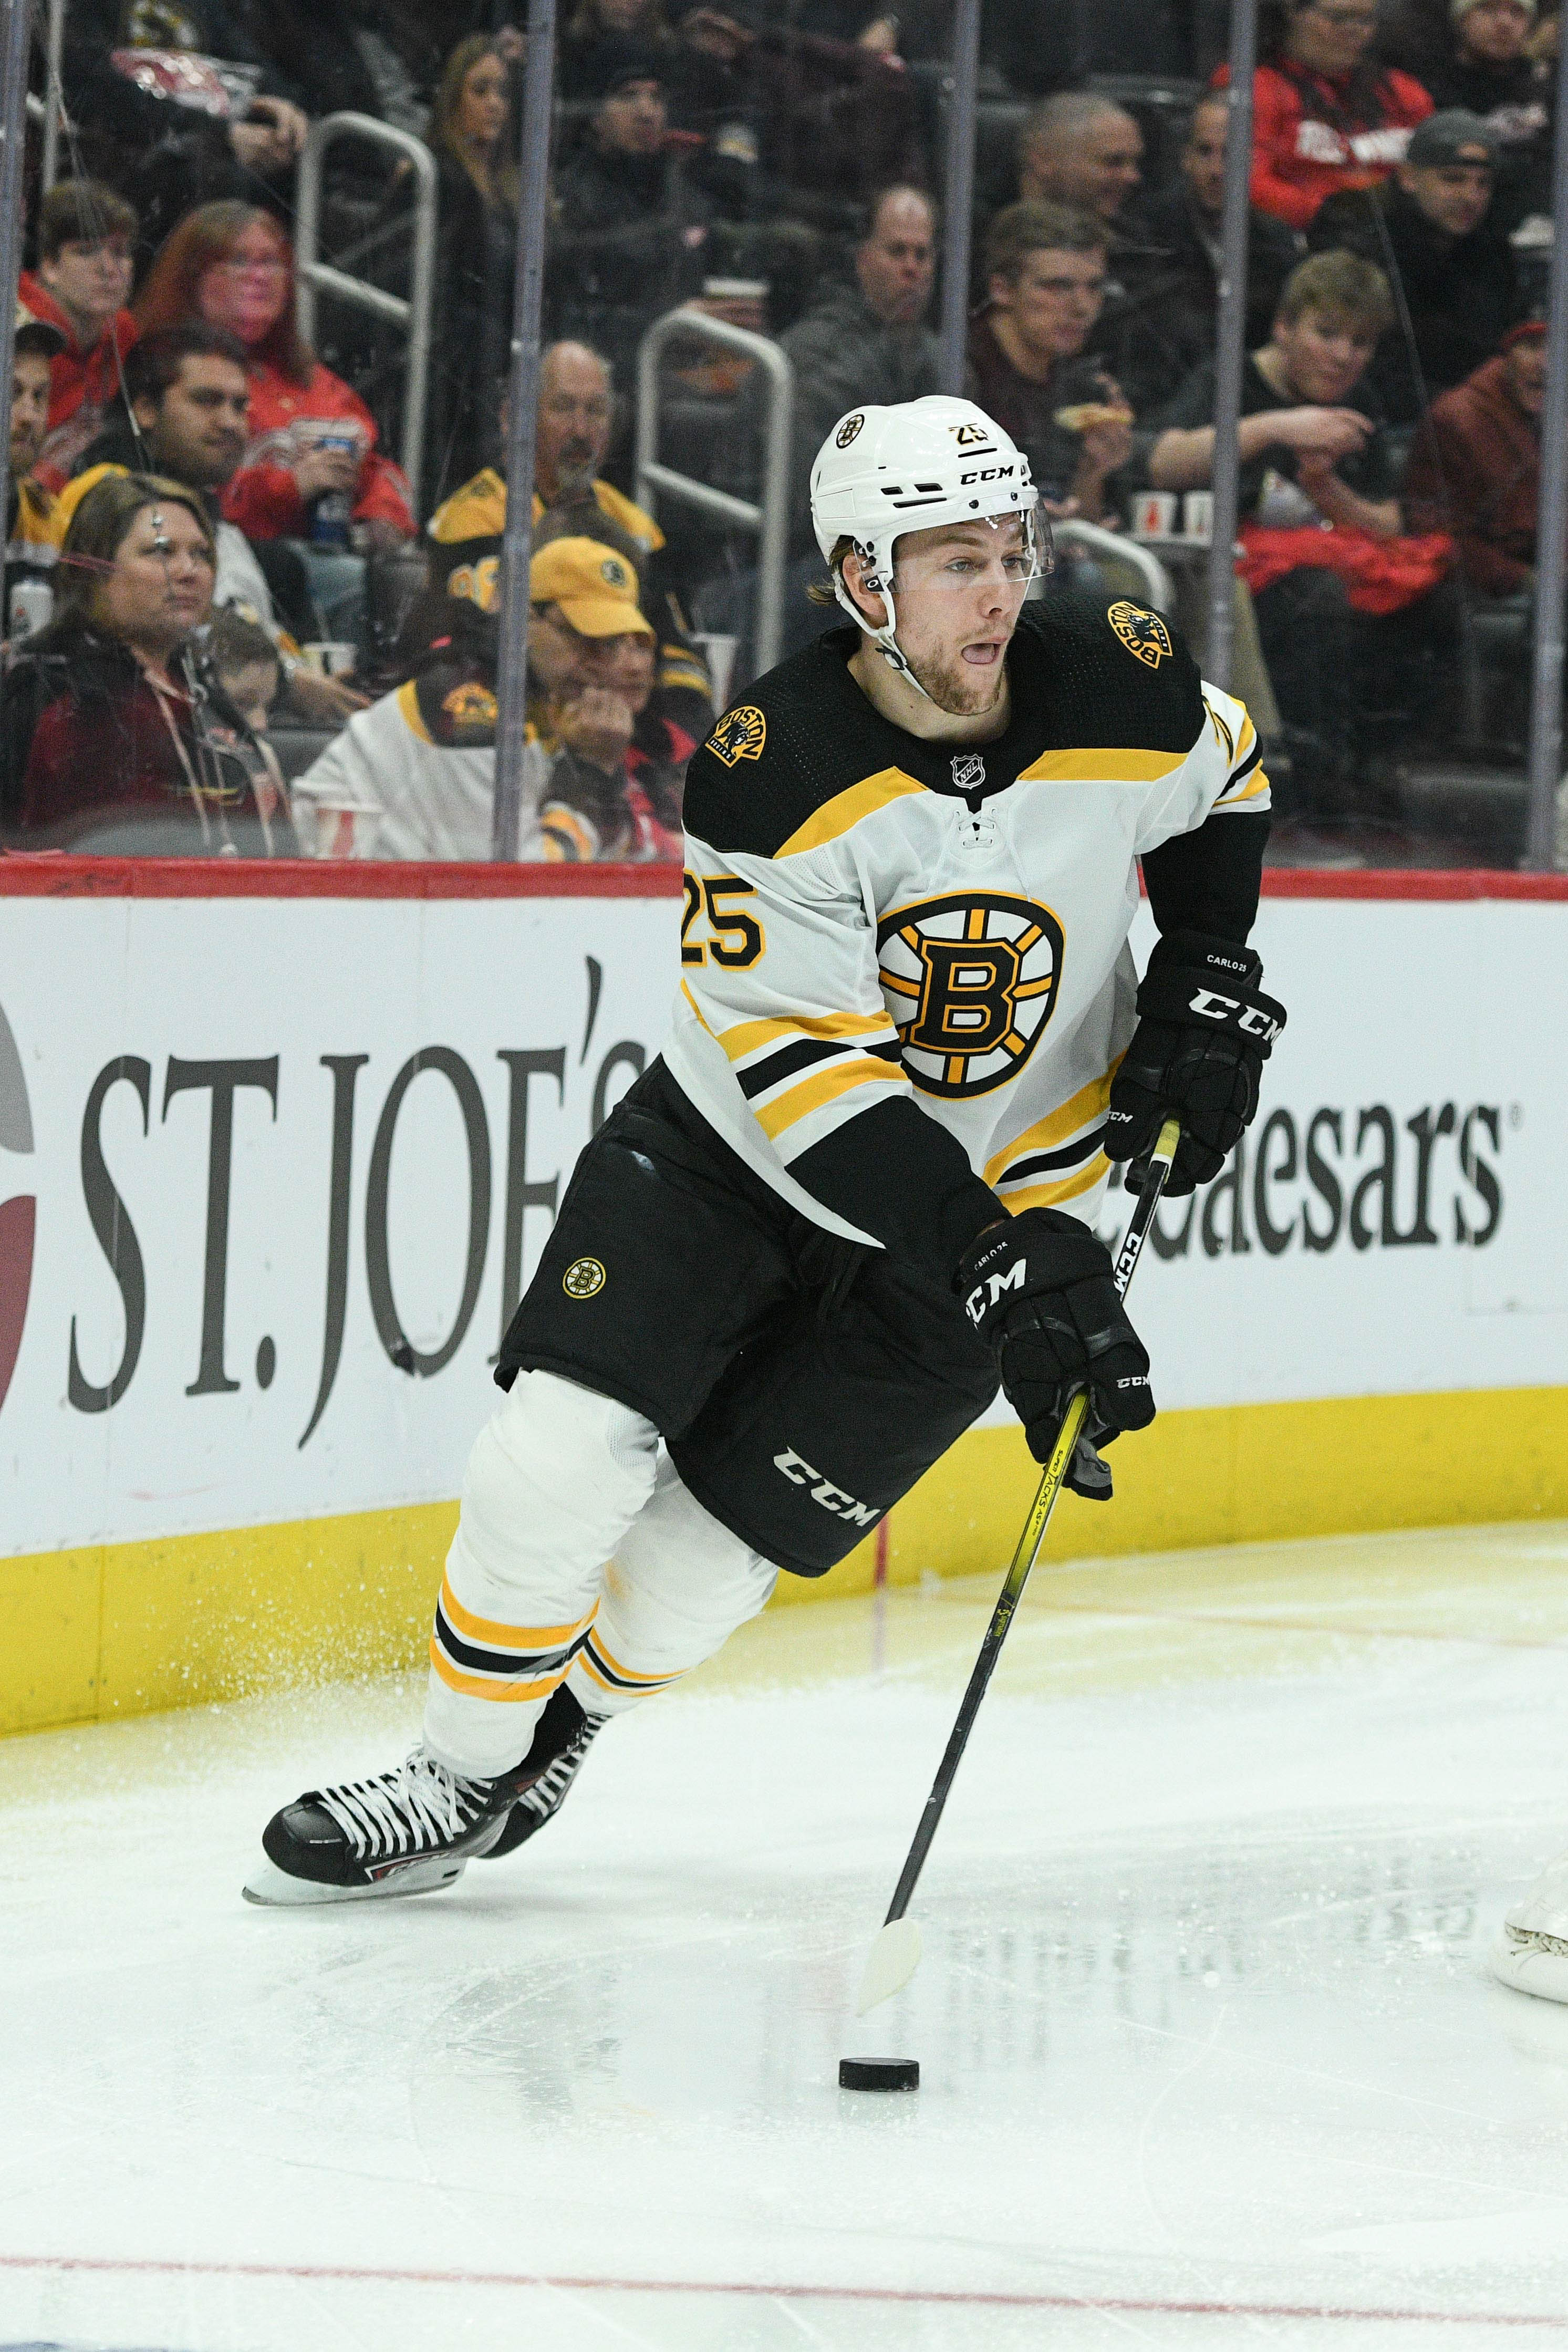 Boston Bruins sign Brandon Carlo to two-year contract extension